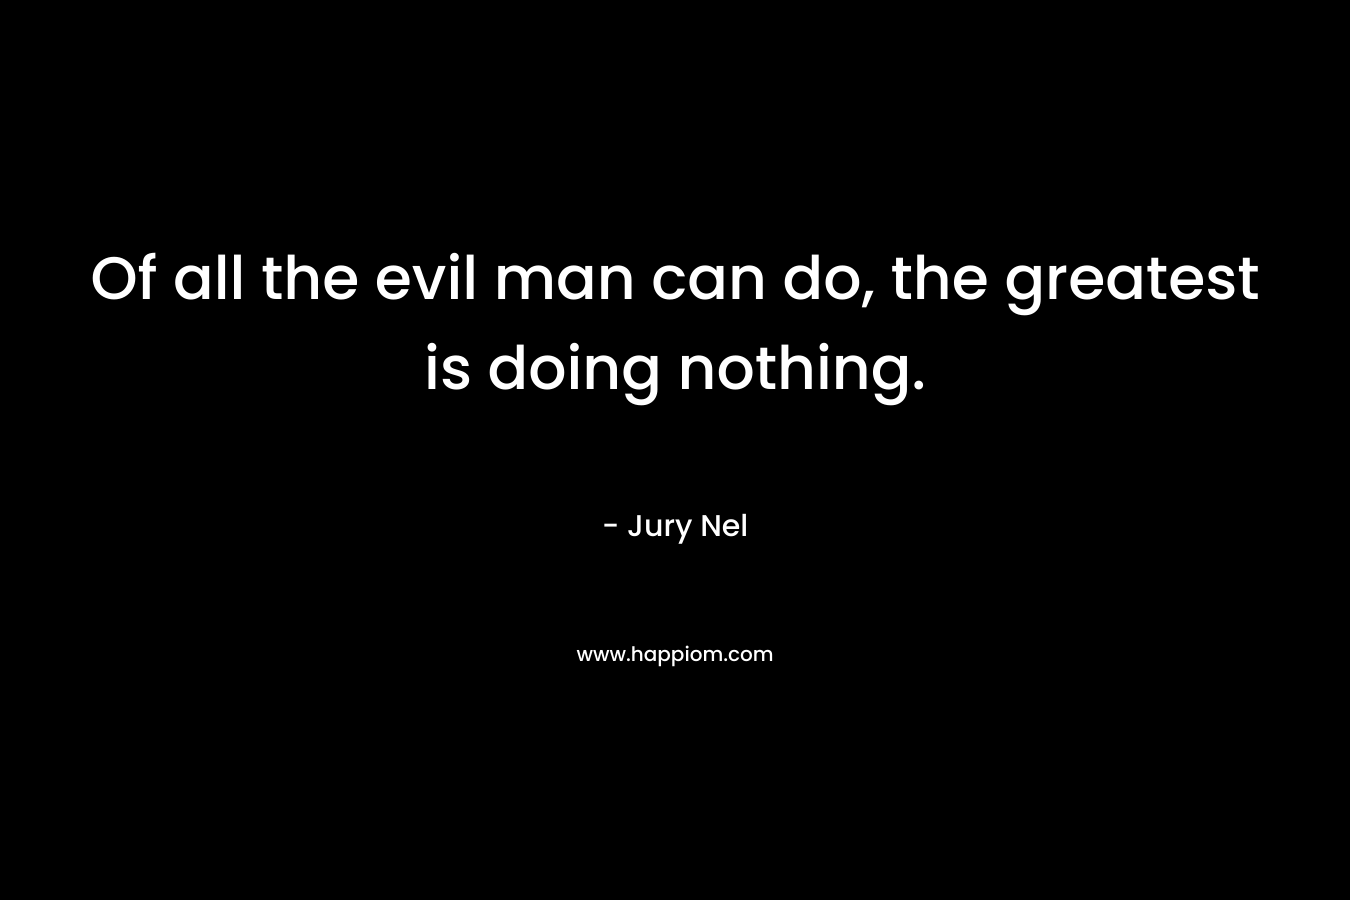 Of all the evil man can do, the greatest is doing nothing.